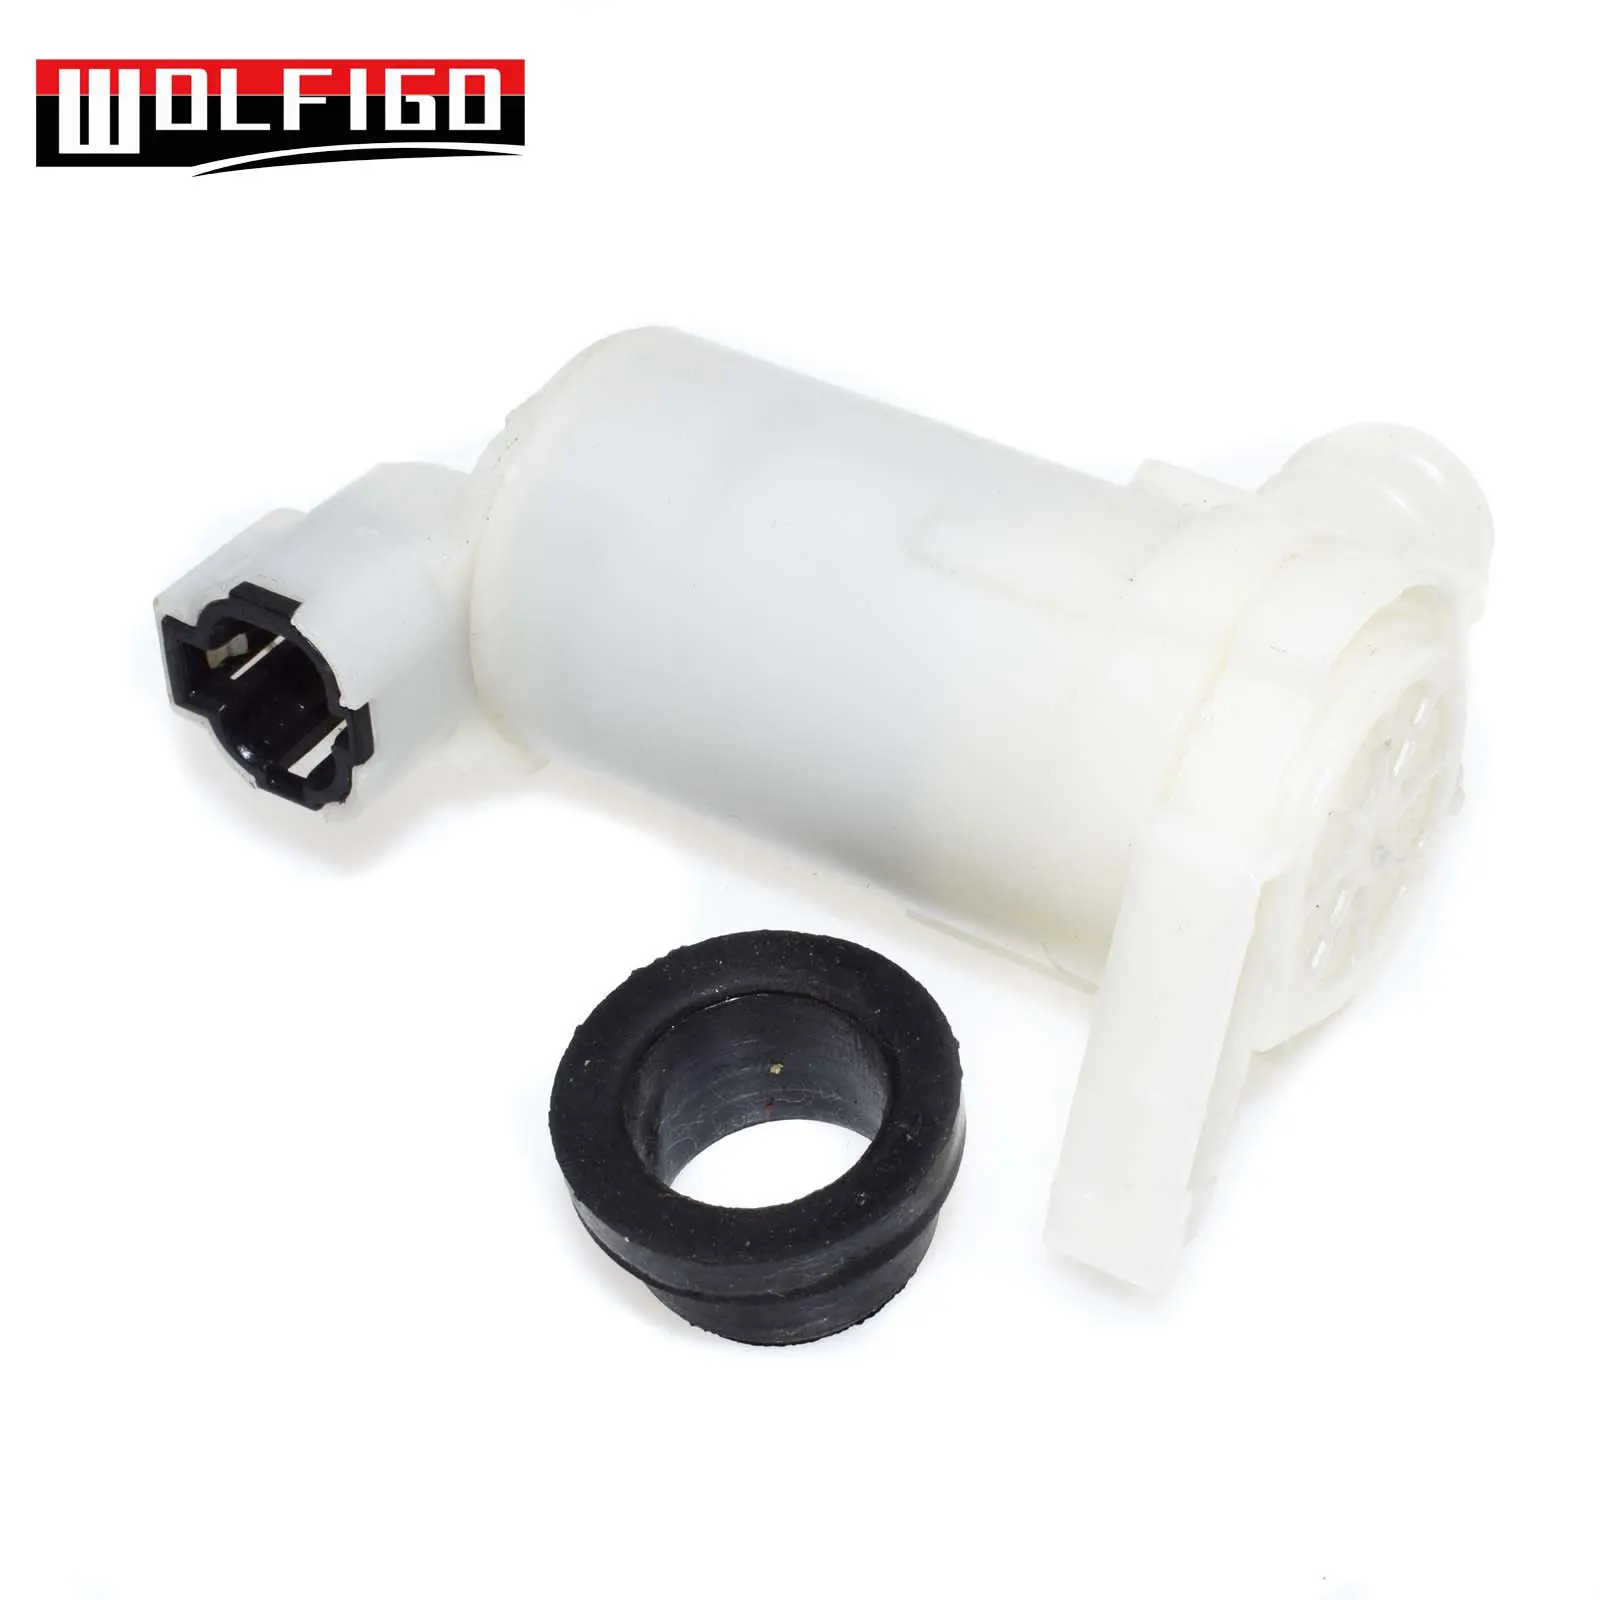 Us 7 78 22 Off Wolfigo 2pins New Windshield Washer Pump W Grommet Fit 2002 03 04 05 06 Nissan Altima 289203z000 2224620 A 2224643 A In Water Pumps